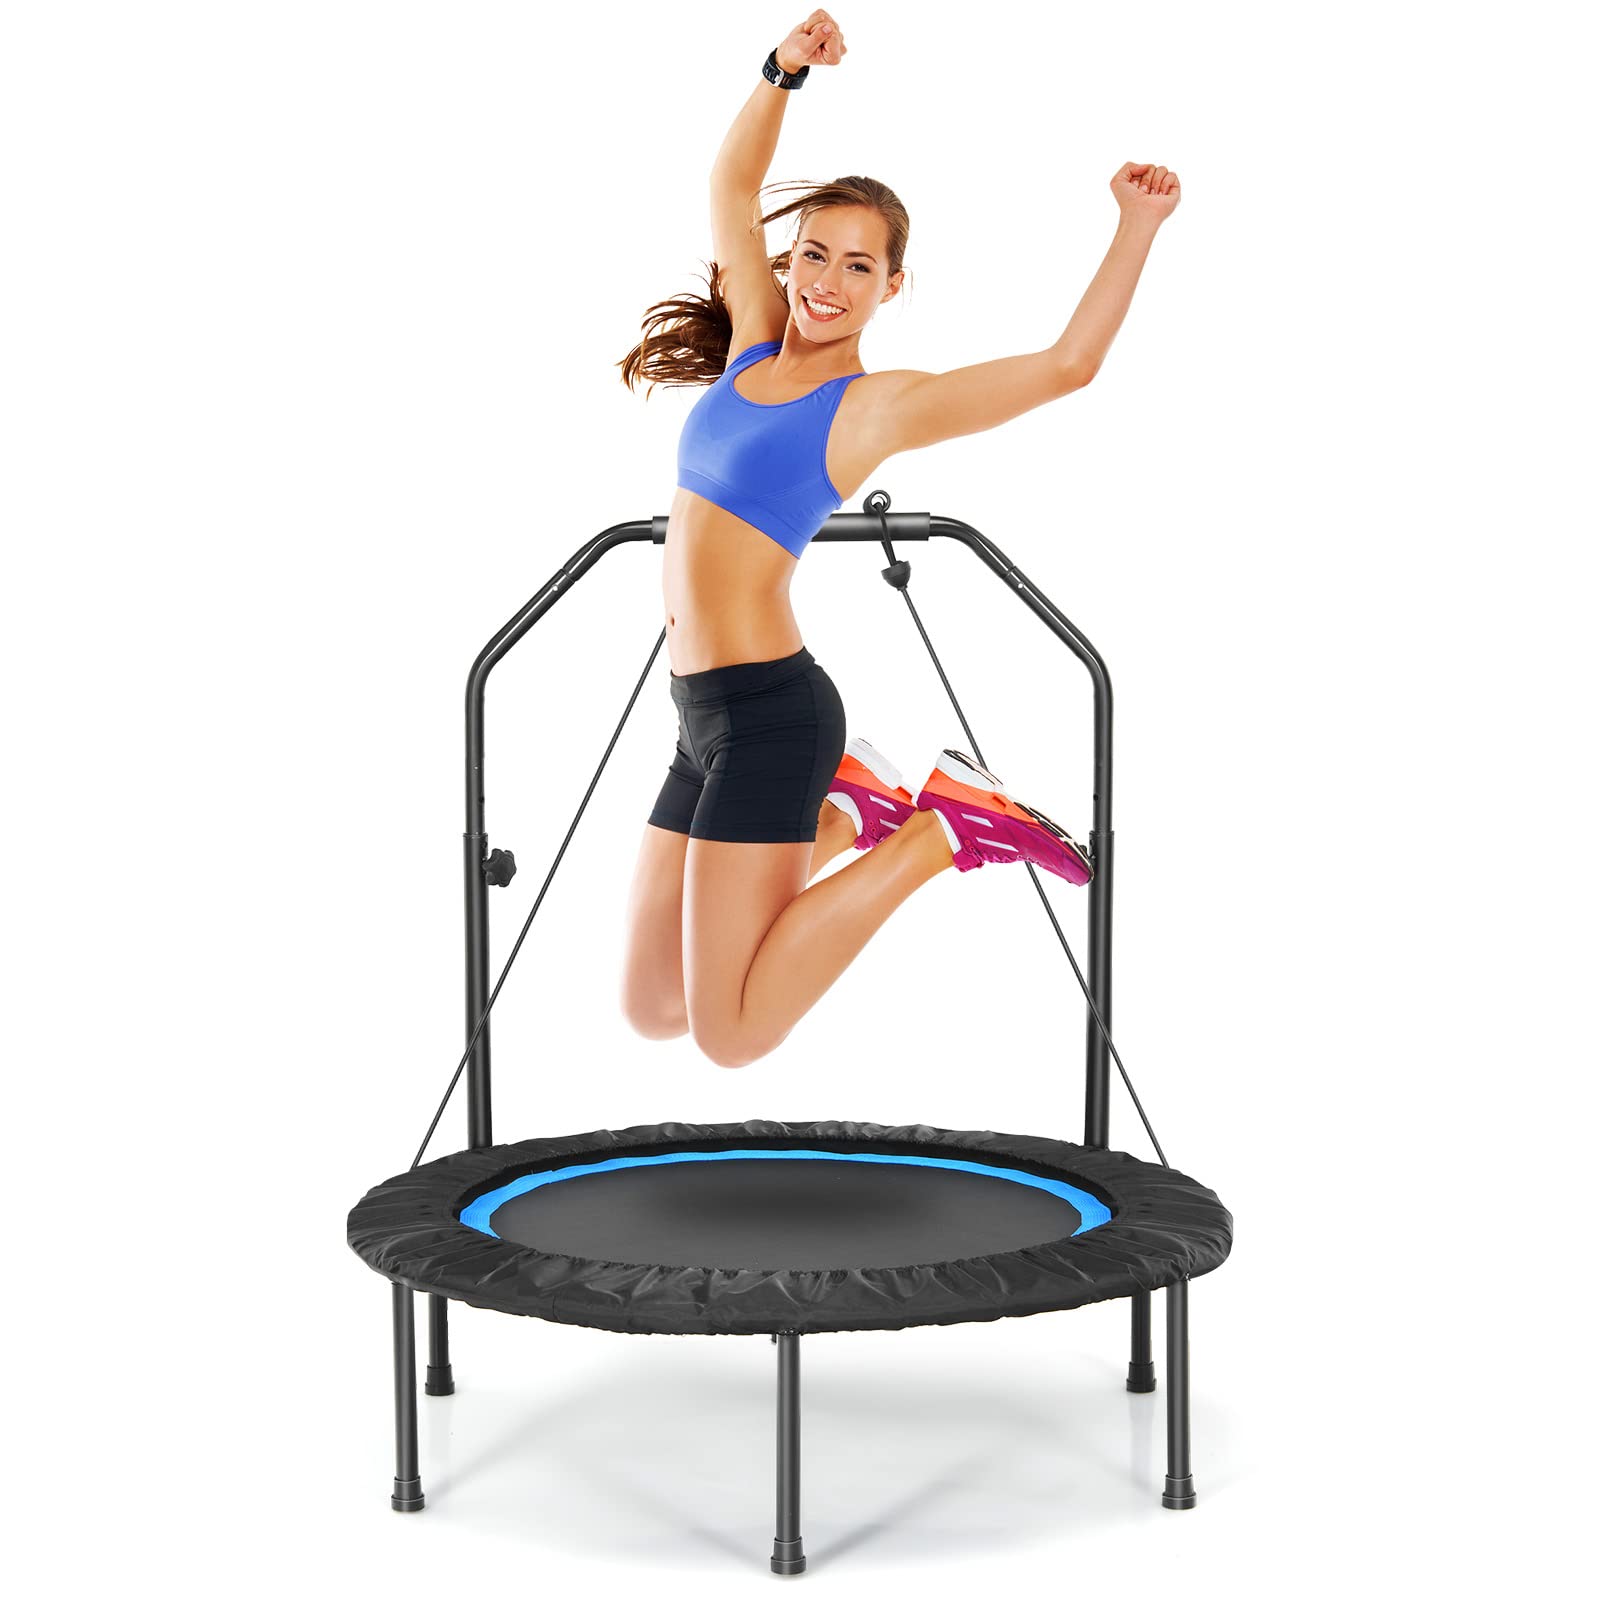 40" Foldable Indoor and Outdoor Mini Fitrness Trampoline with Adjustable Handle